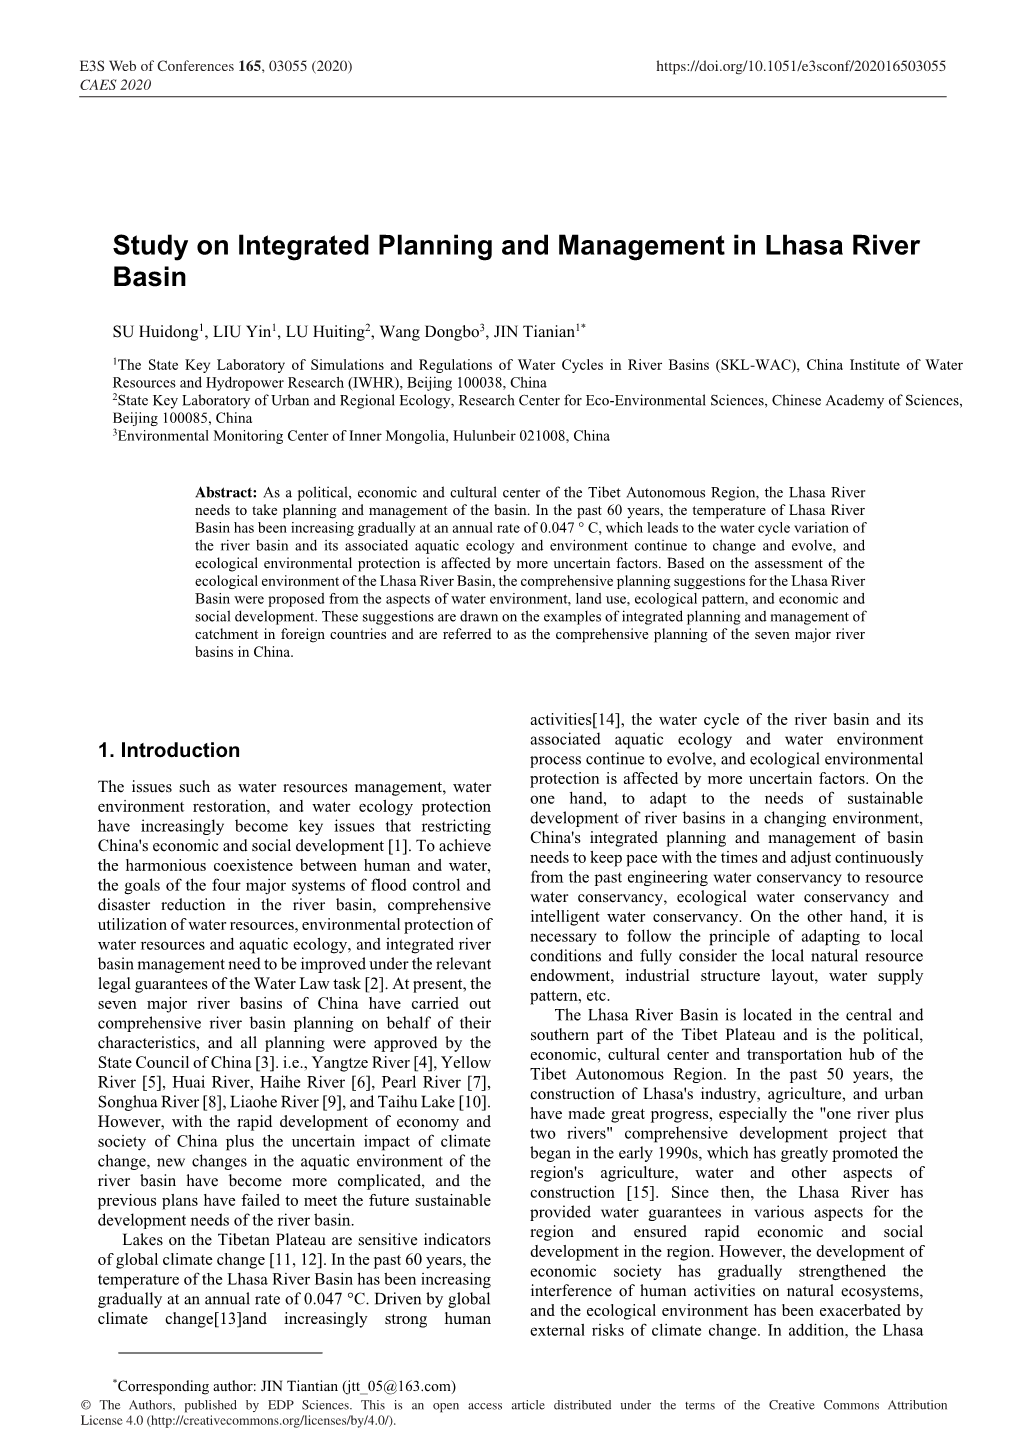 Study on Integrated Planning and Management in Lhasa River Basin